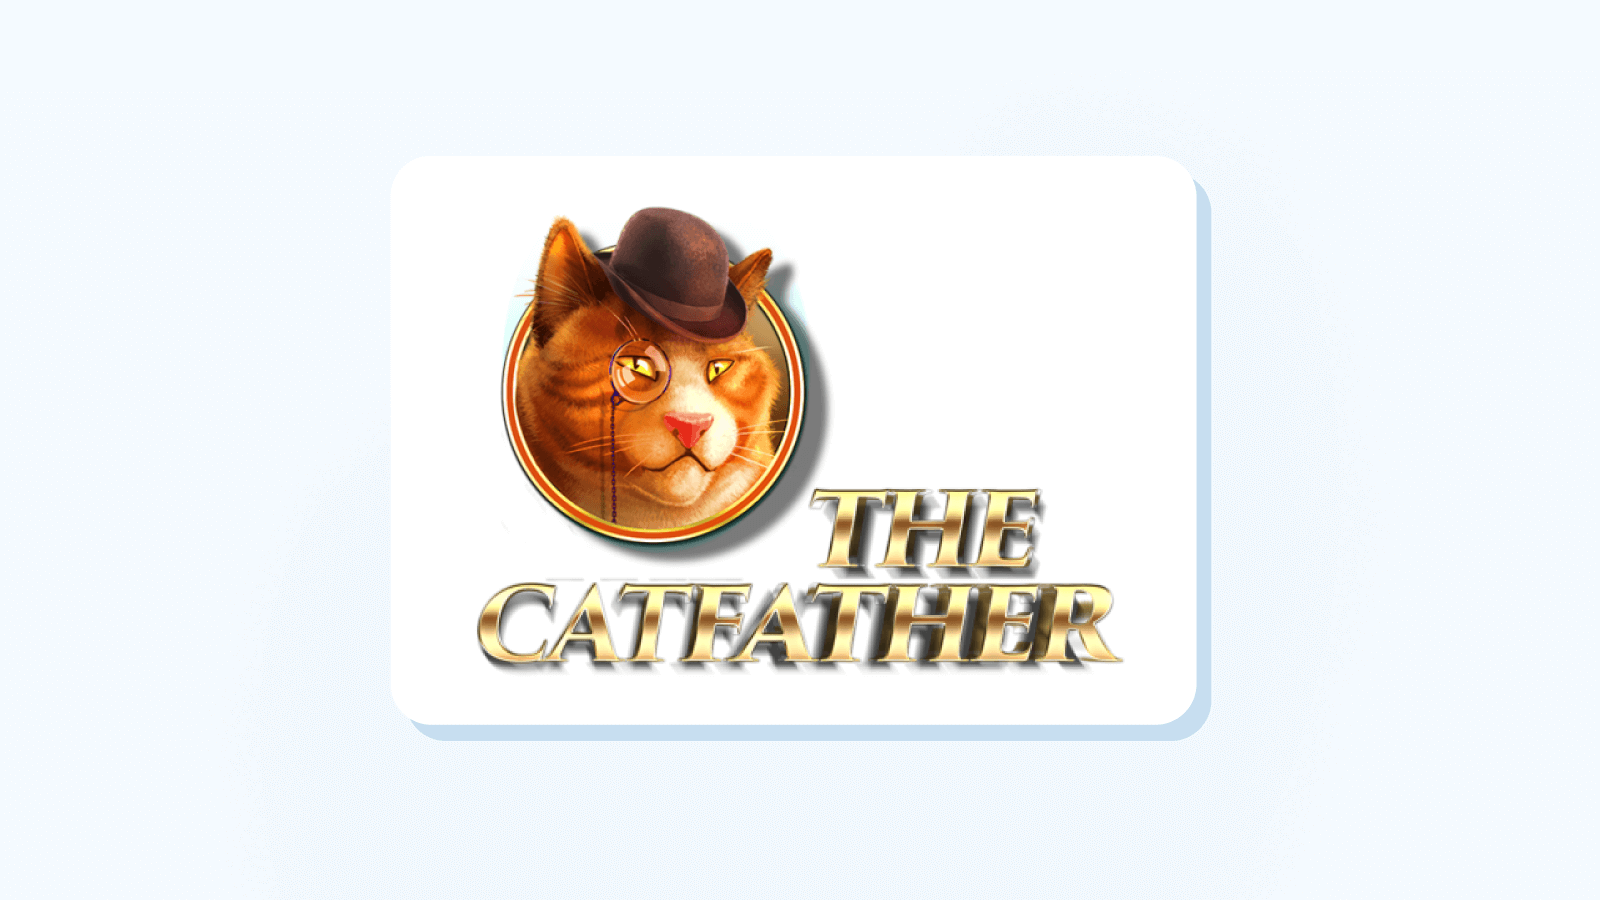 4.The Catfather (98.1%) – best payout Pragmatic Play slot